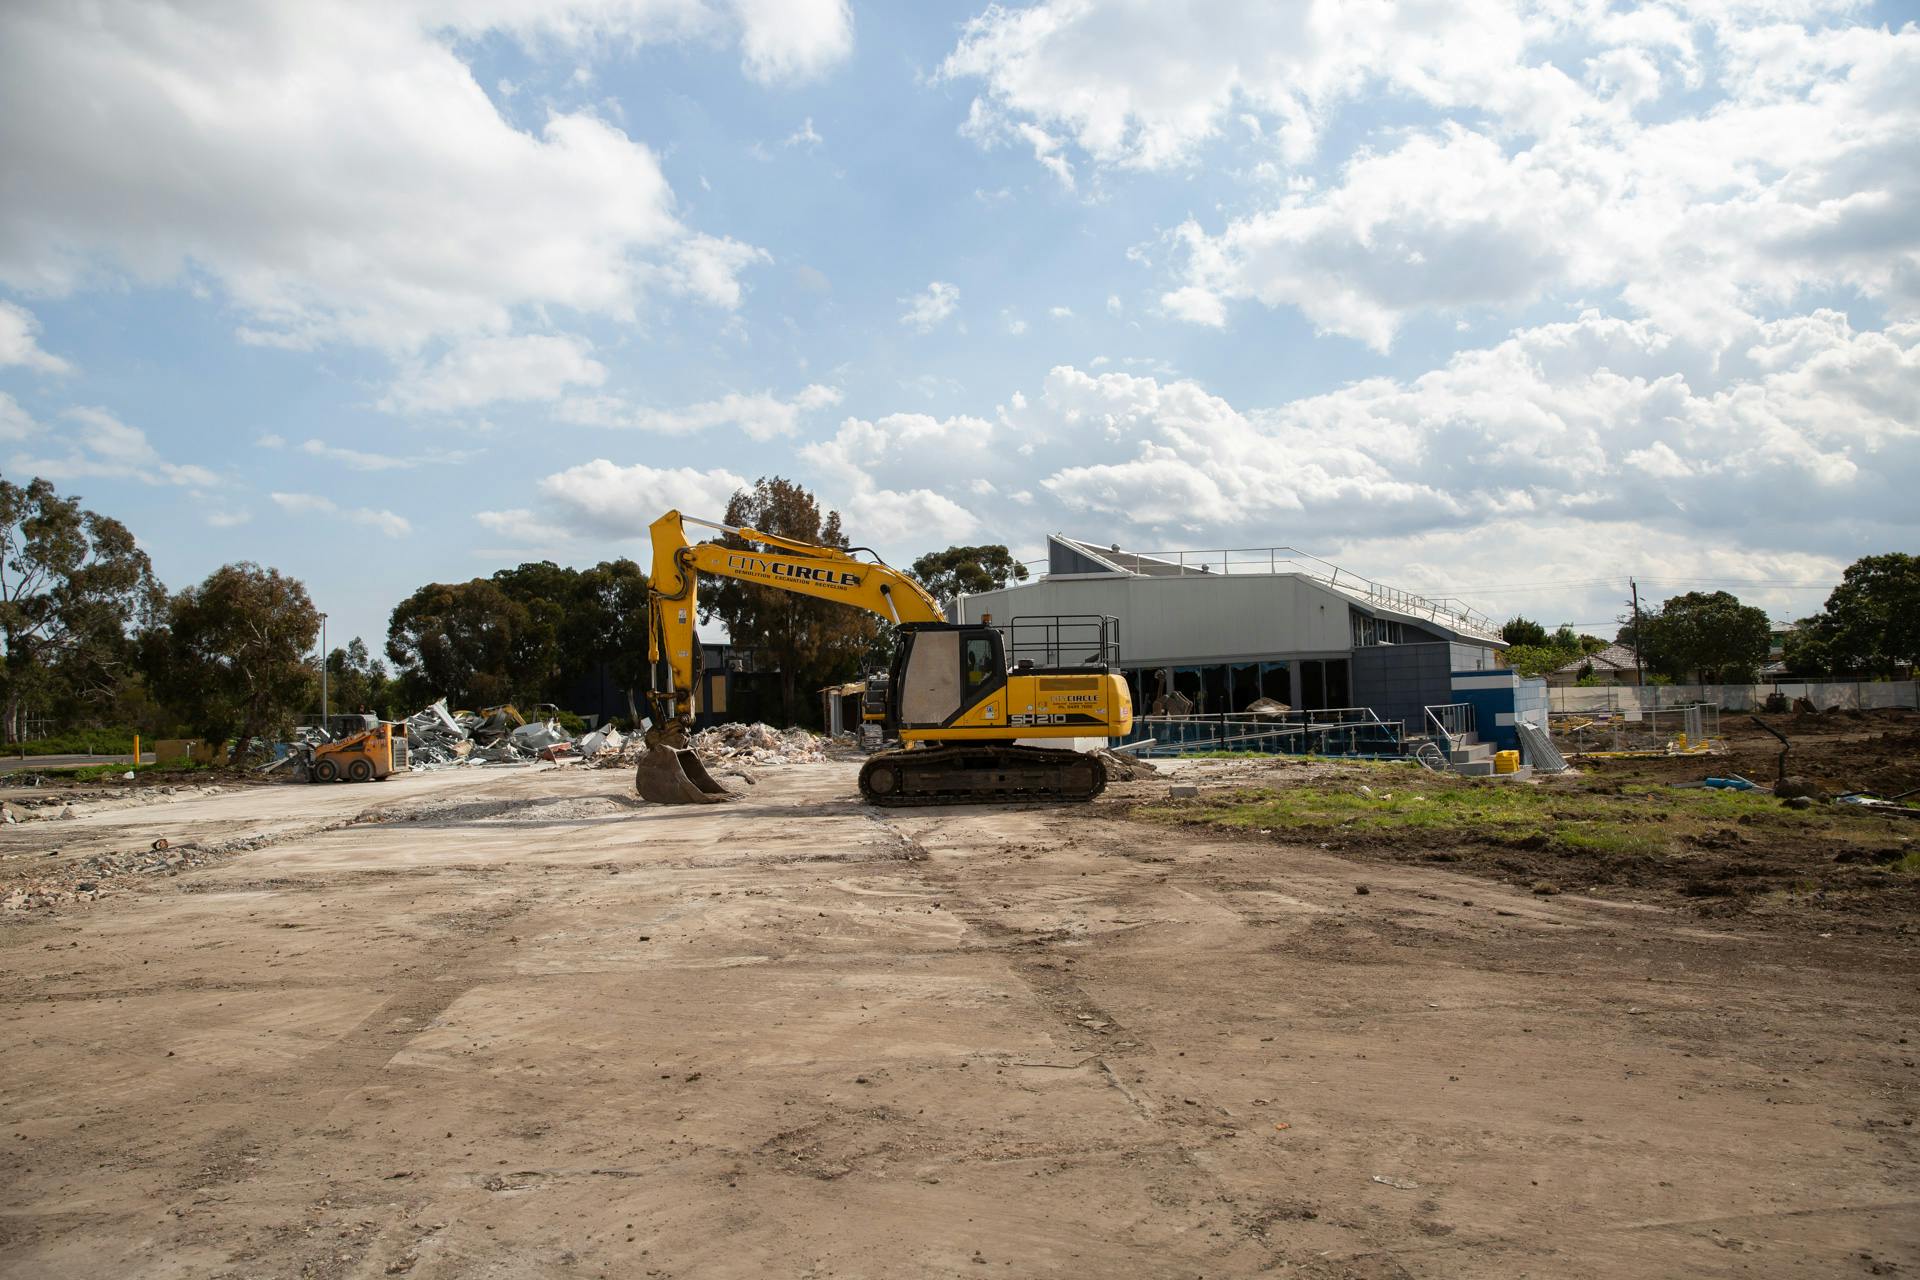 Construction on site in October 2019.